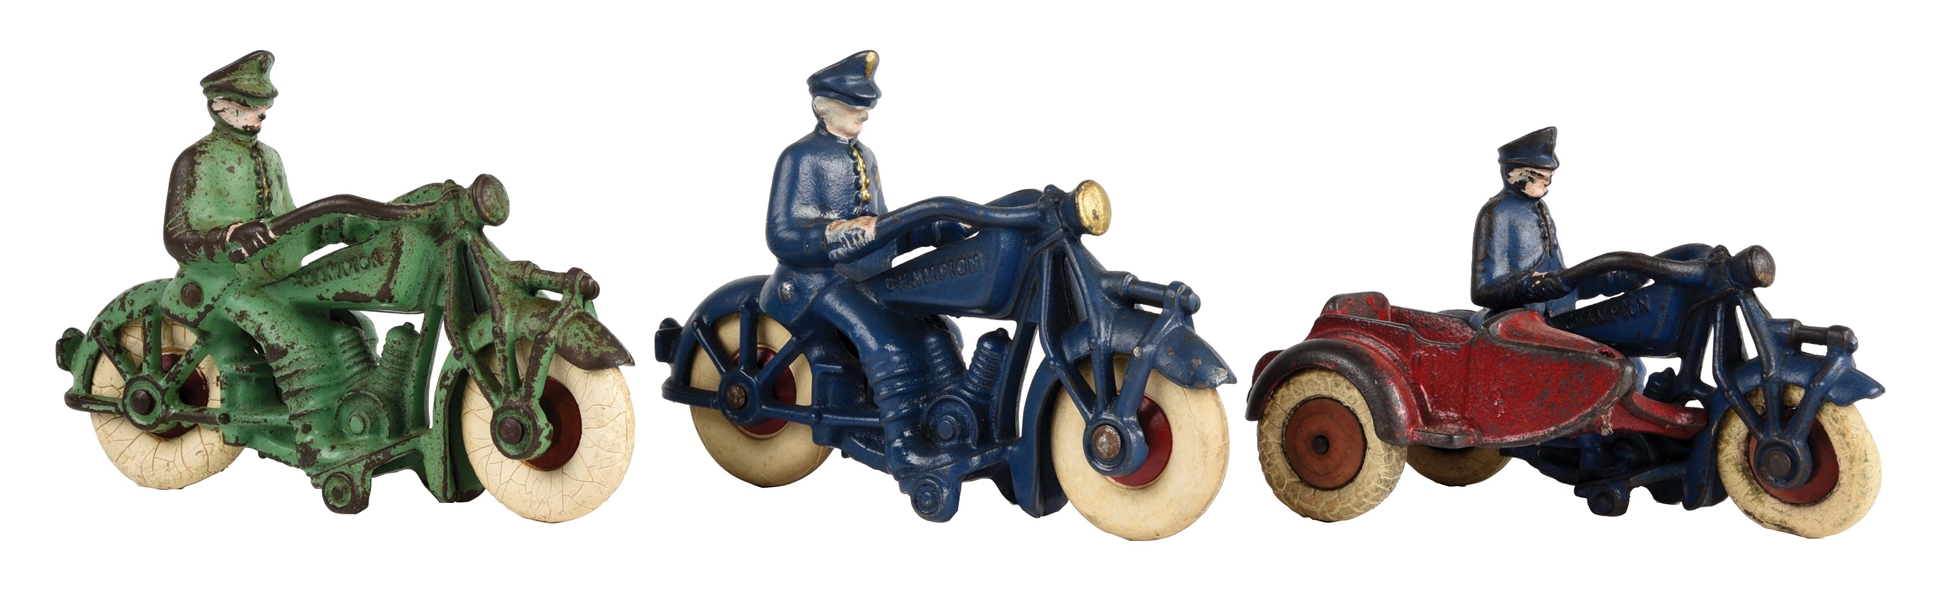 LOT OF 3: CAST-IRON CHAMPION MOTORCYCLE TOYS.